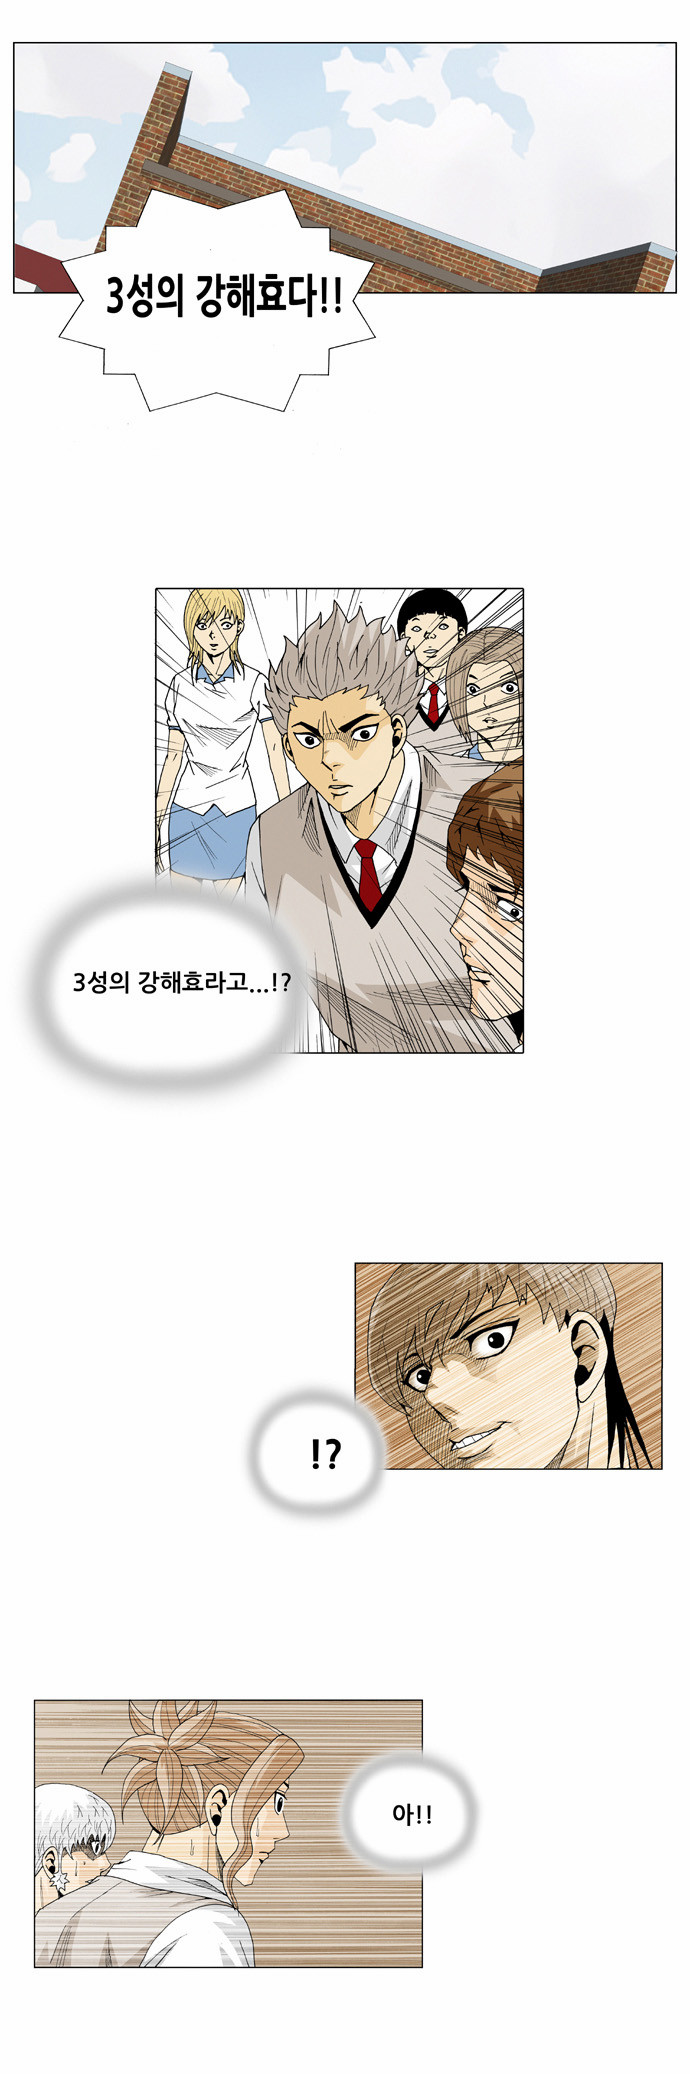 Ultimate Legend - Kang Hae Hyo - Chapter 21 - Page 23